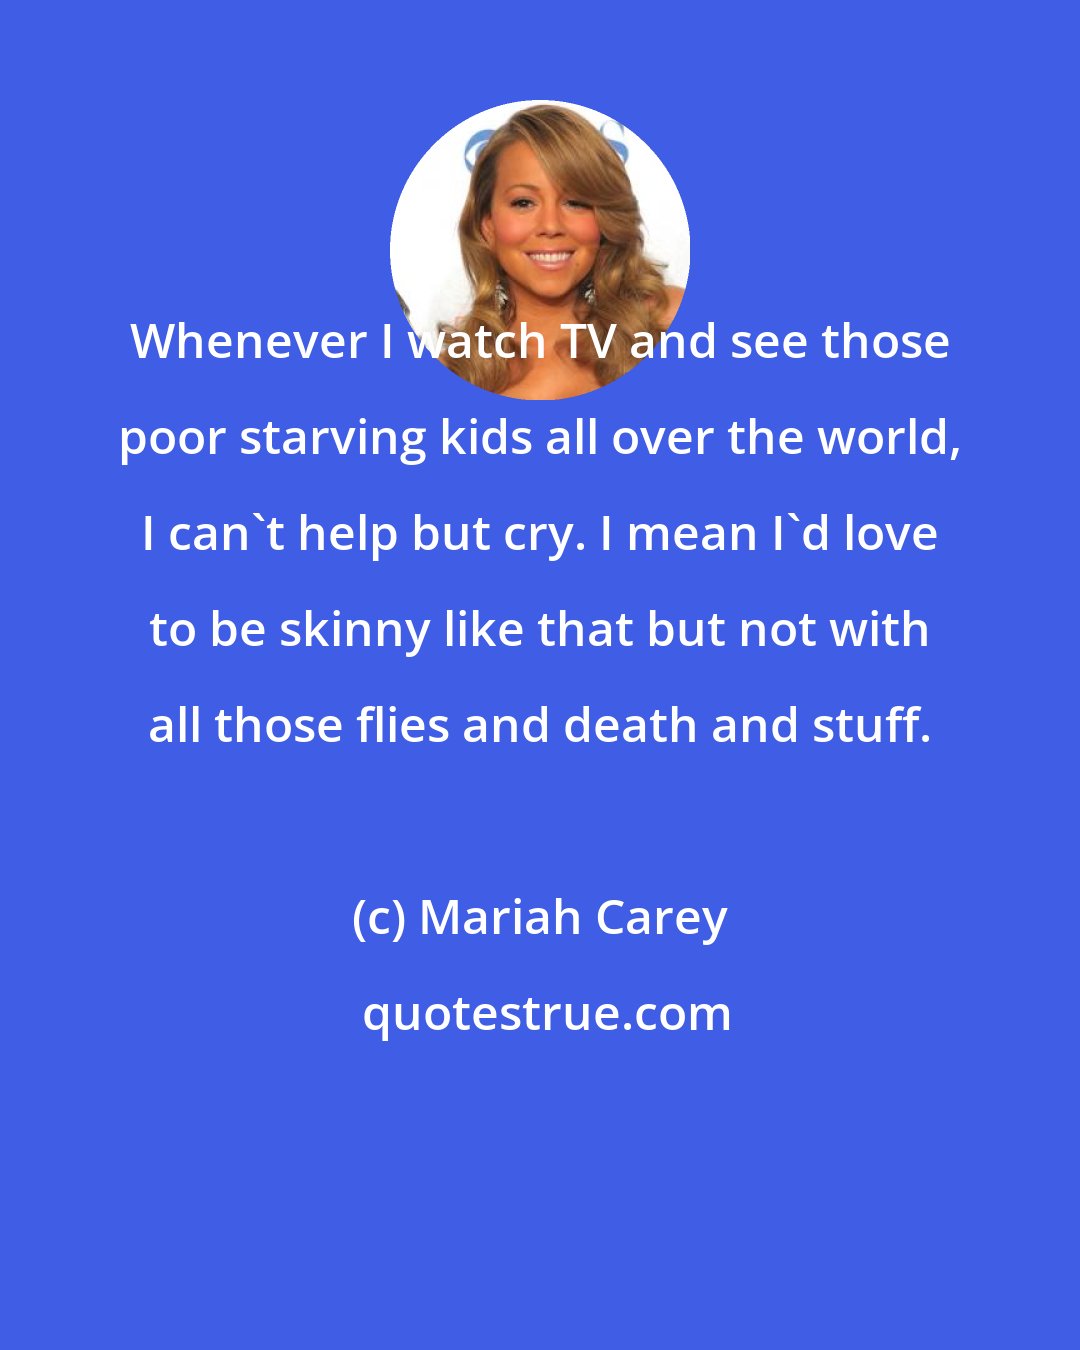 Mariah Carey: Whenever I watch TV and see those poor starving kids all over the world, I can't help but cry. I mean I'd love to be skinny like that but not with all those flies and death and stuff.